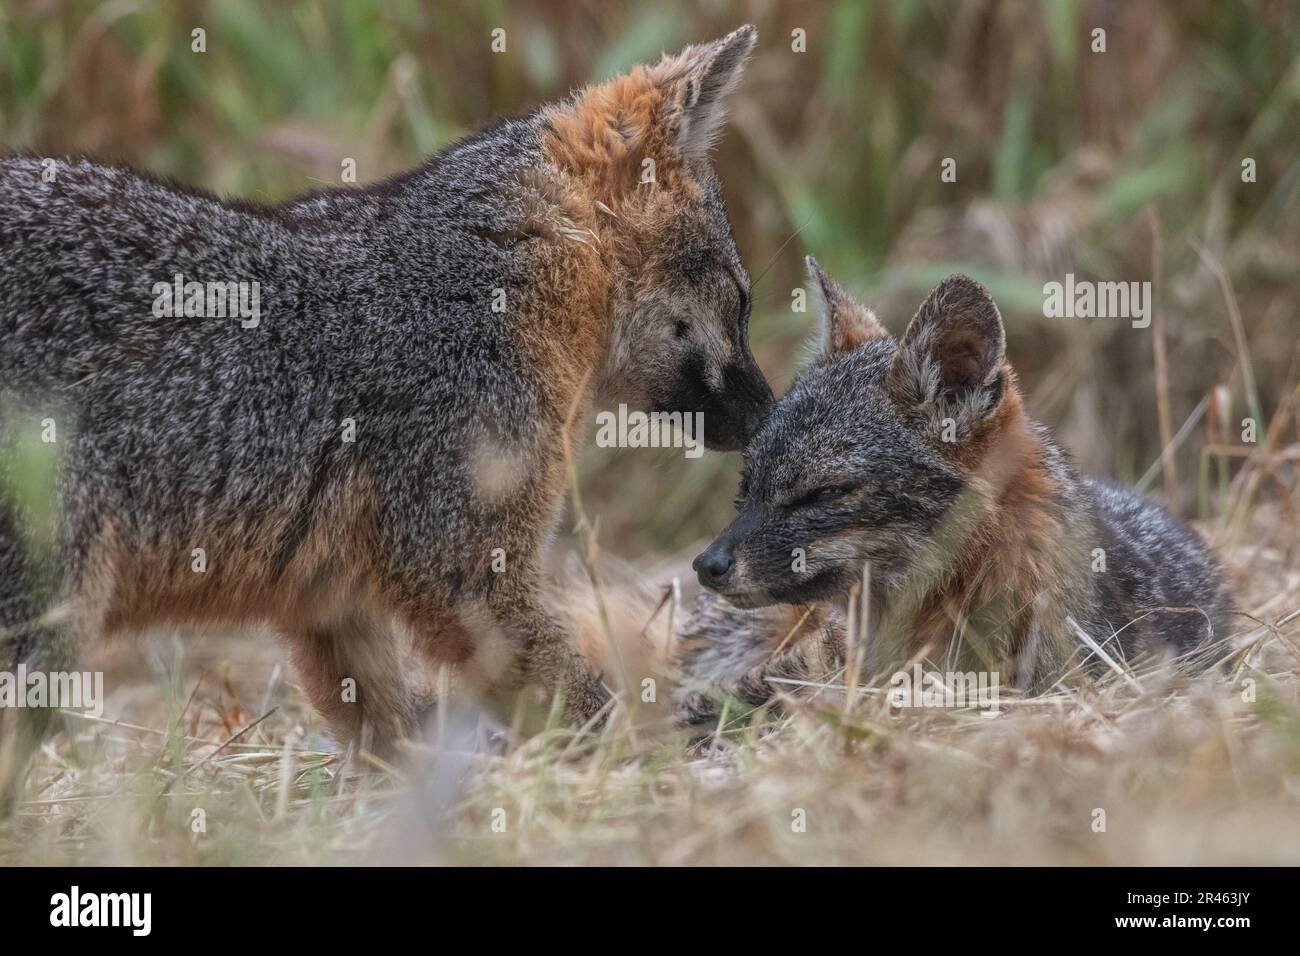 A pair of island foxes (Urocyon littoralis) grooming each other on Santa Cruz island in Channel islands National Park, California. Stock Photo